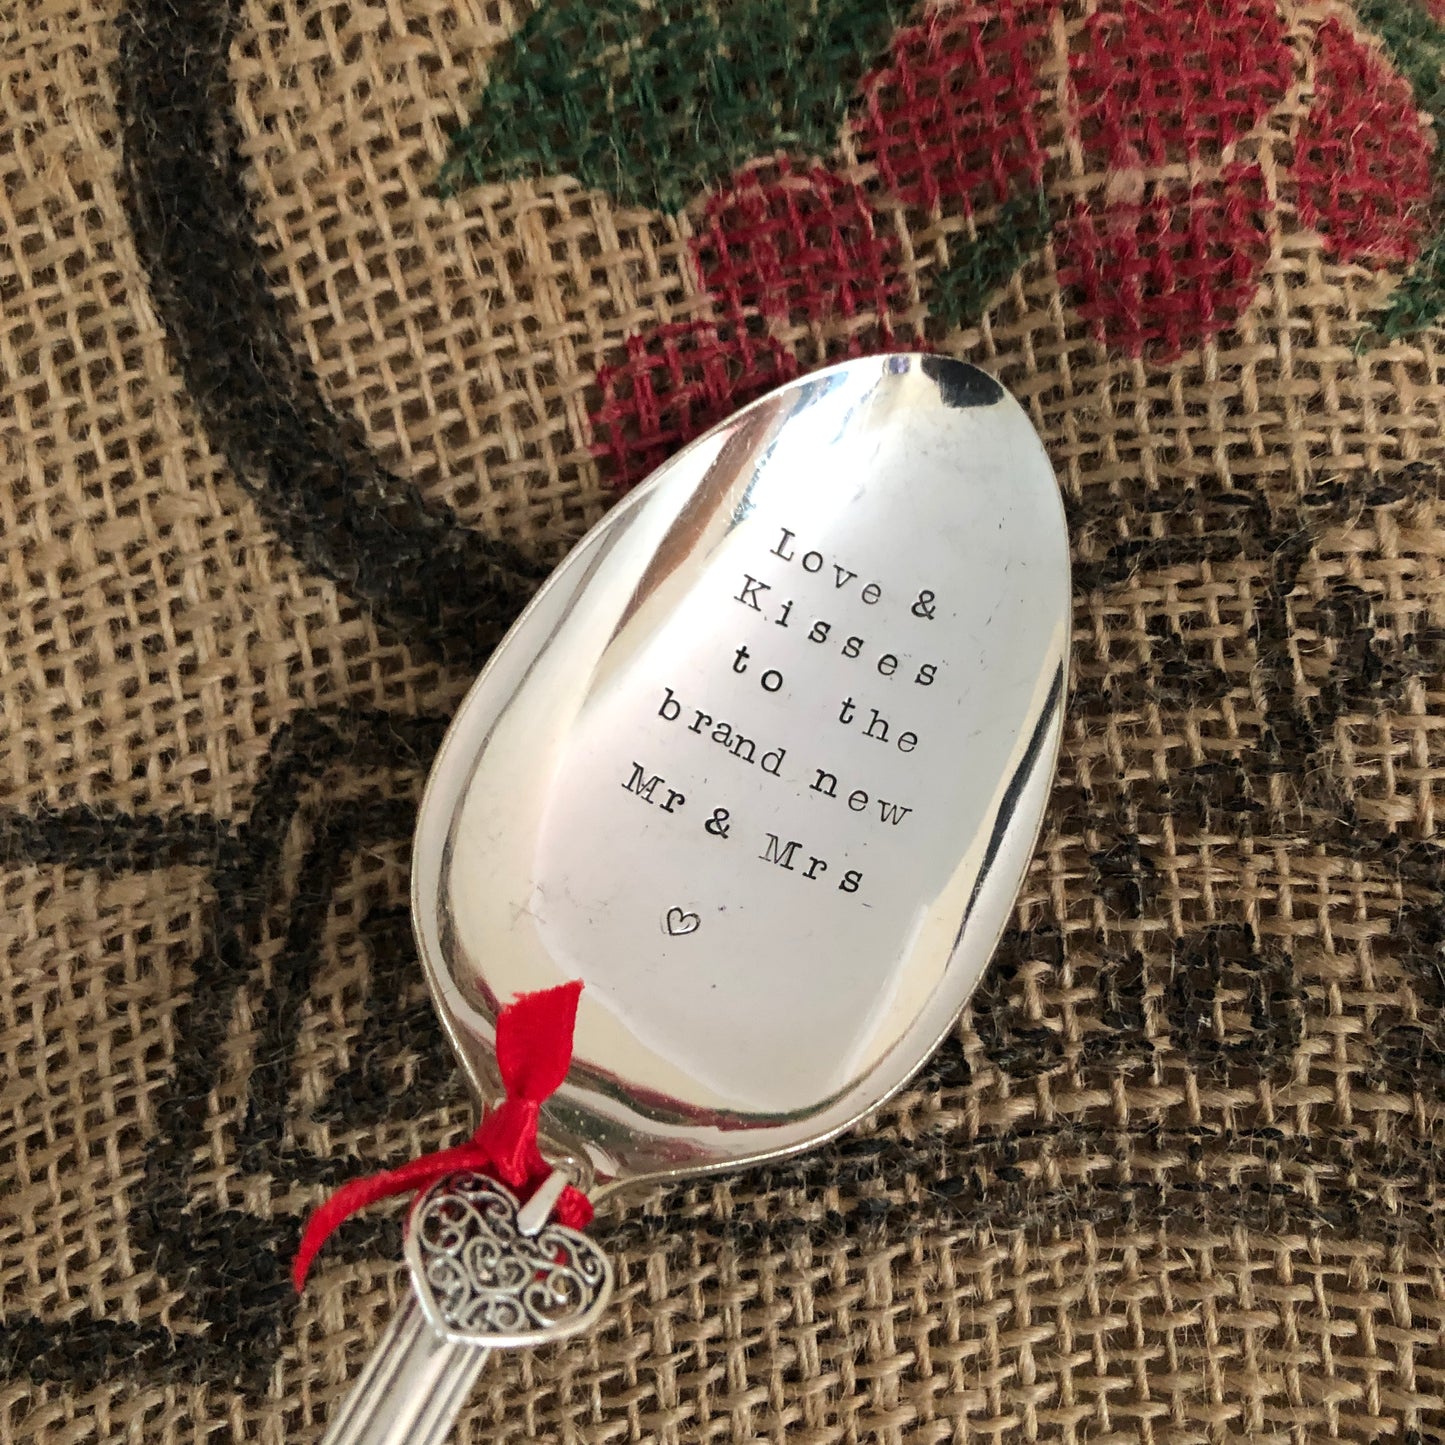 Wedding Gift - LOVE & KISSES TO THE BRAND NEW MR & MRS  Silver Plated Serving Spoon - Free P&P